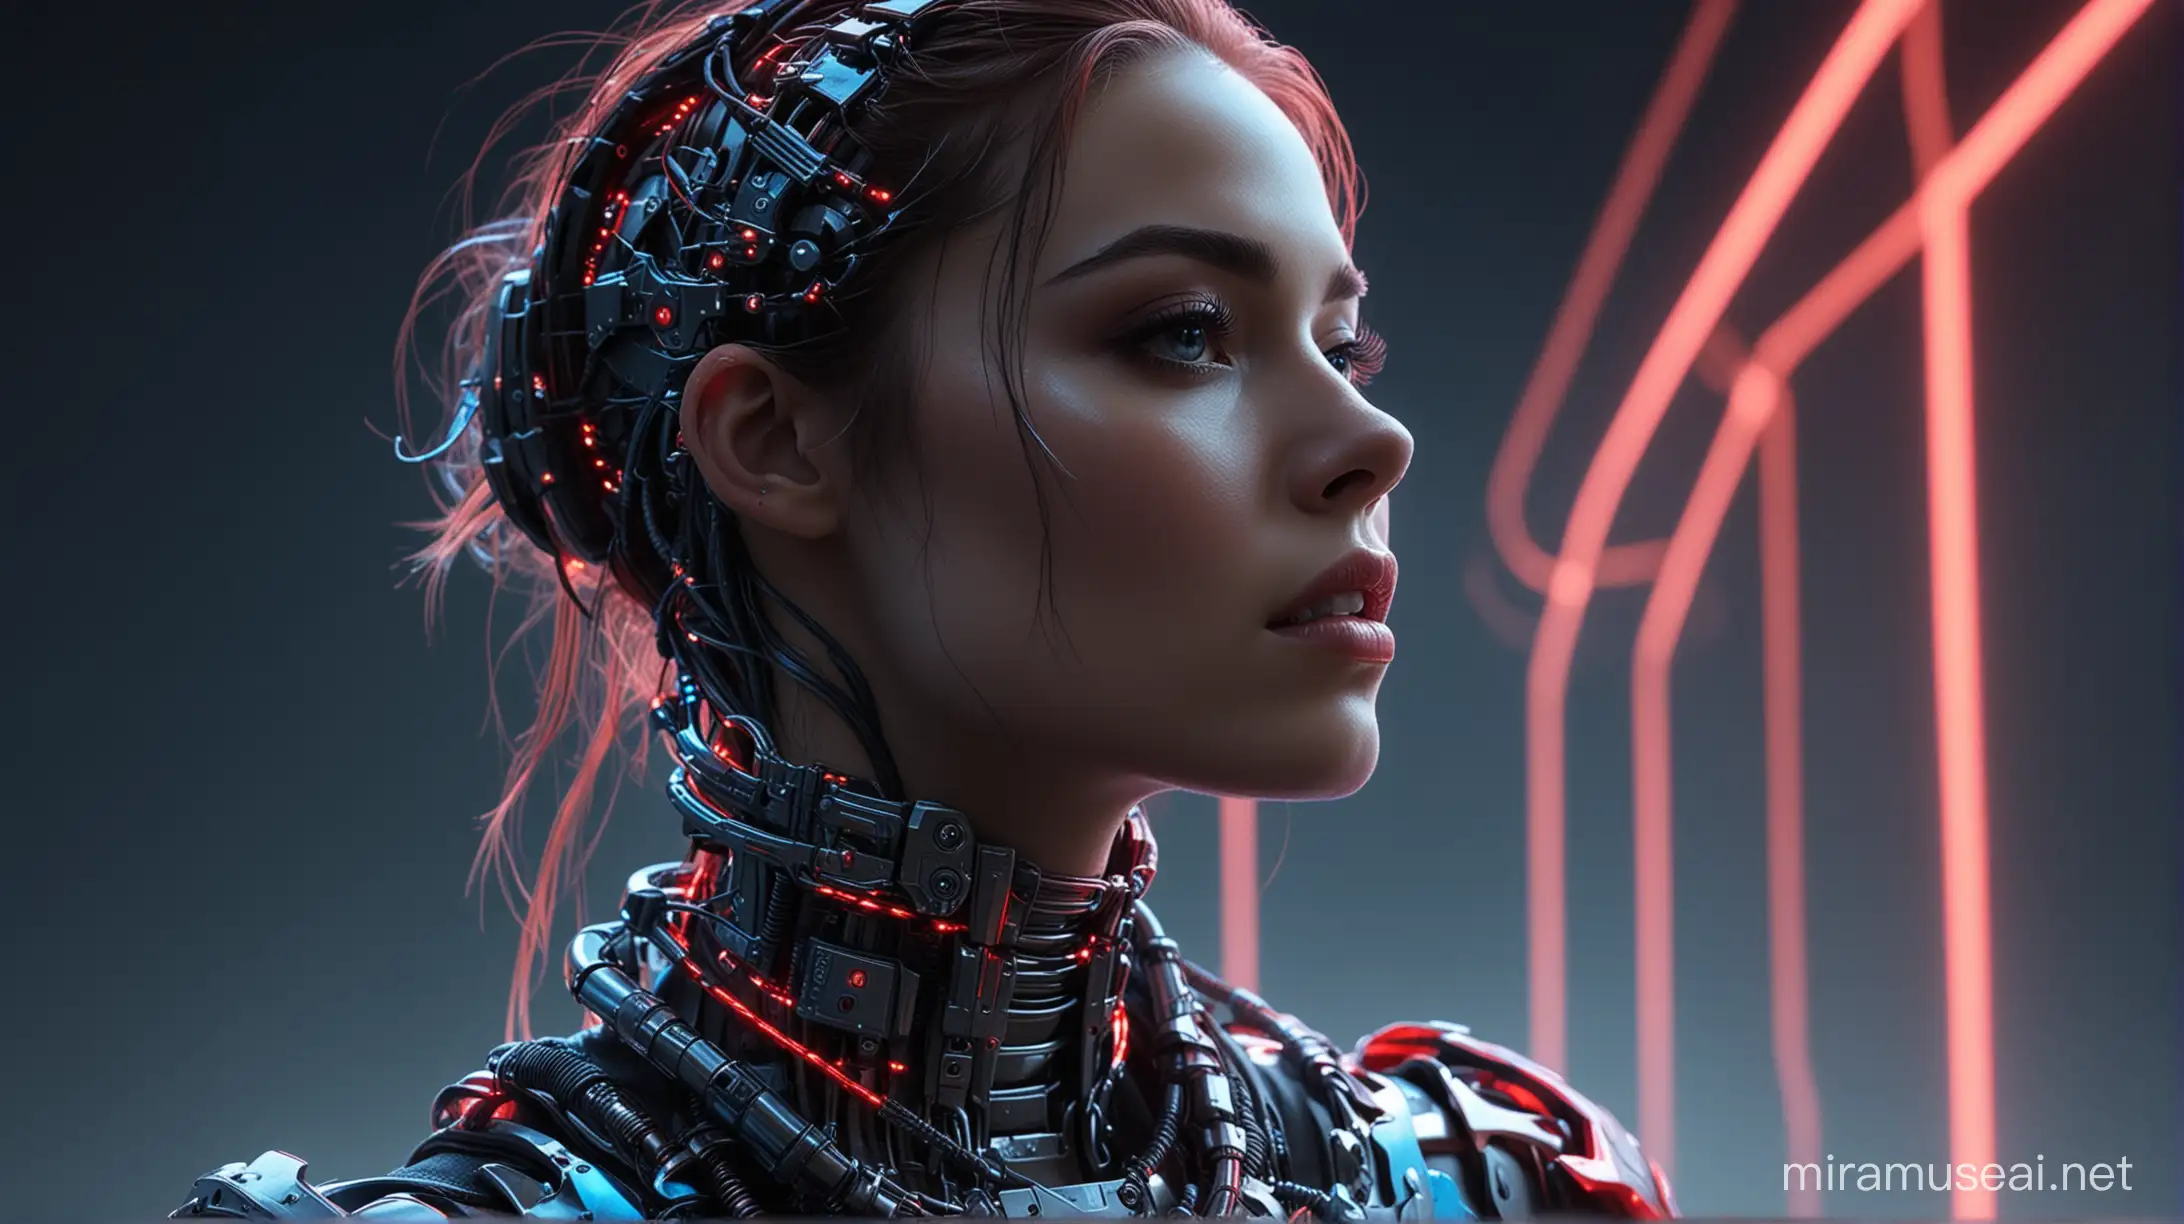 The cyborg girl is looking up at the sky with wires sticking out of her neck and throat., portrait, neon red and blue light, darkness, dark, black tones best quality, 4k, 8k, highres, masterpiece, ultra-detailed, realistic, vibrant and lively characters, unique and eccentric outfits, expressive facial expressions, ethereal lighting, exaggerated proportions, rich textures and depth, creator, fantasy elements, imaginative and vibrant world, emotional and dramatic scenes, editorial, avant-garde hyper futuristic surreal fashion, extreme detail, detailed background